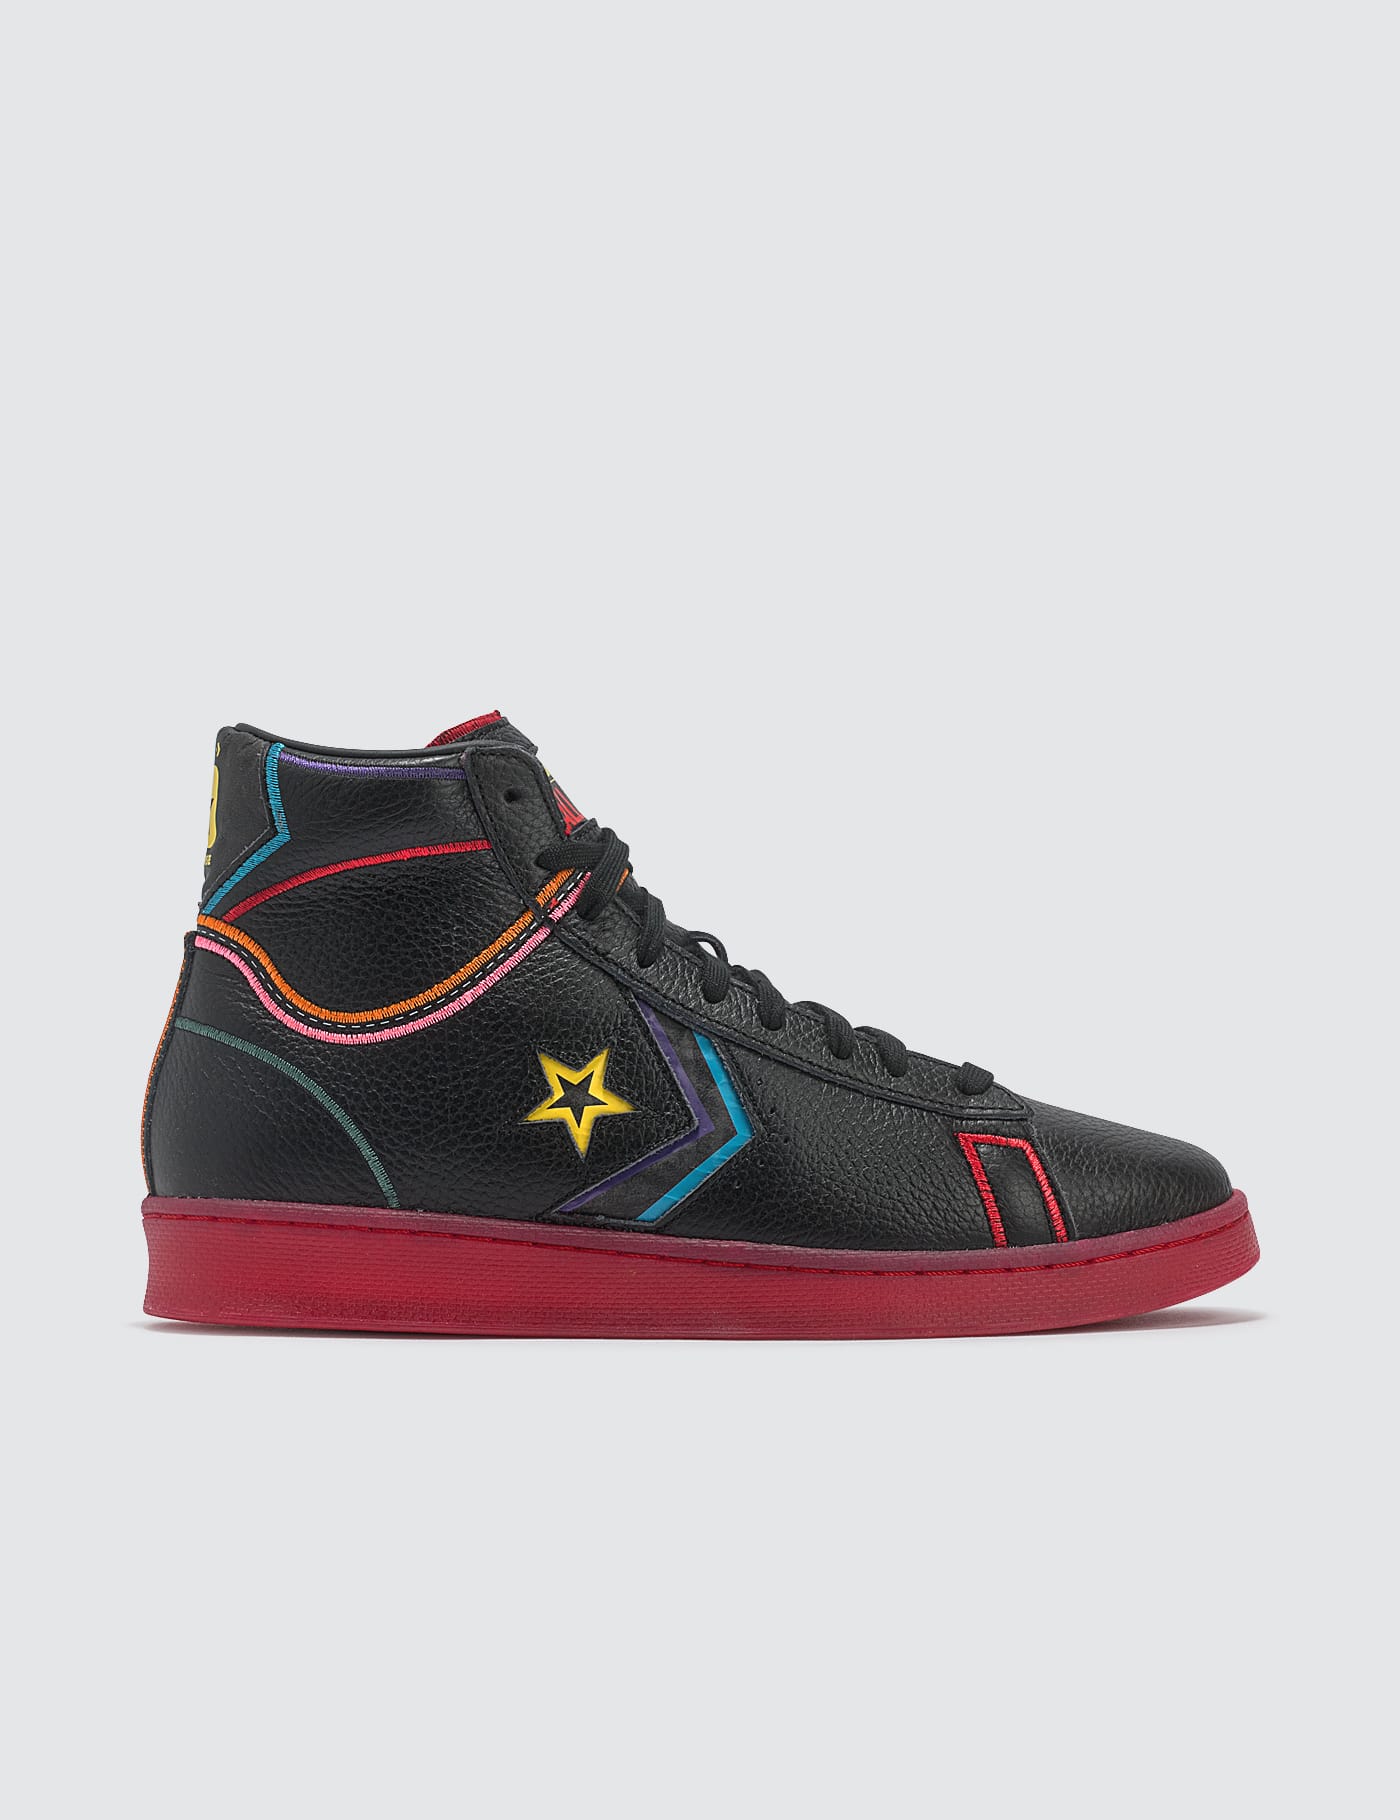 Converse - Pro Leather Hi | HBX - Globally Curated Fashion and Lifestyle by  Hypebeast سعر التقويم